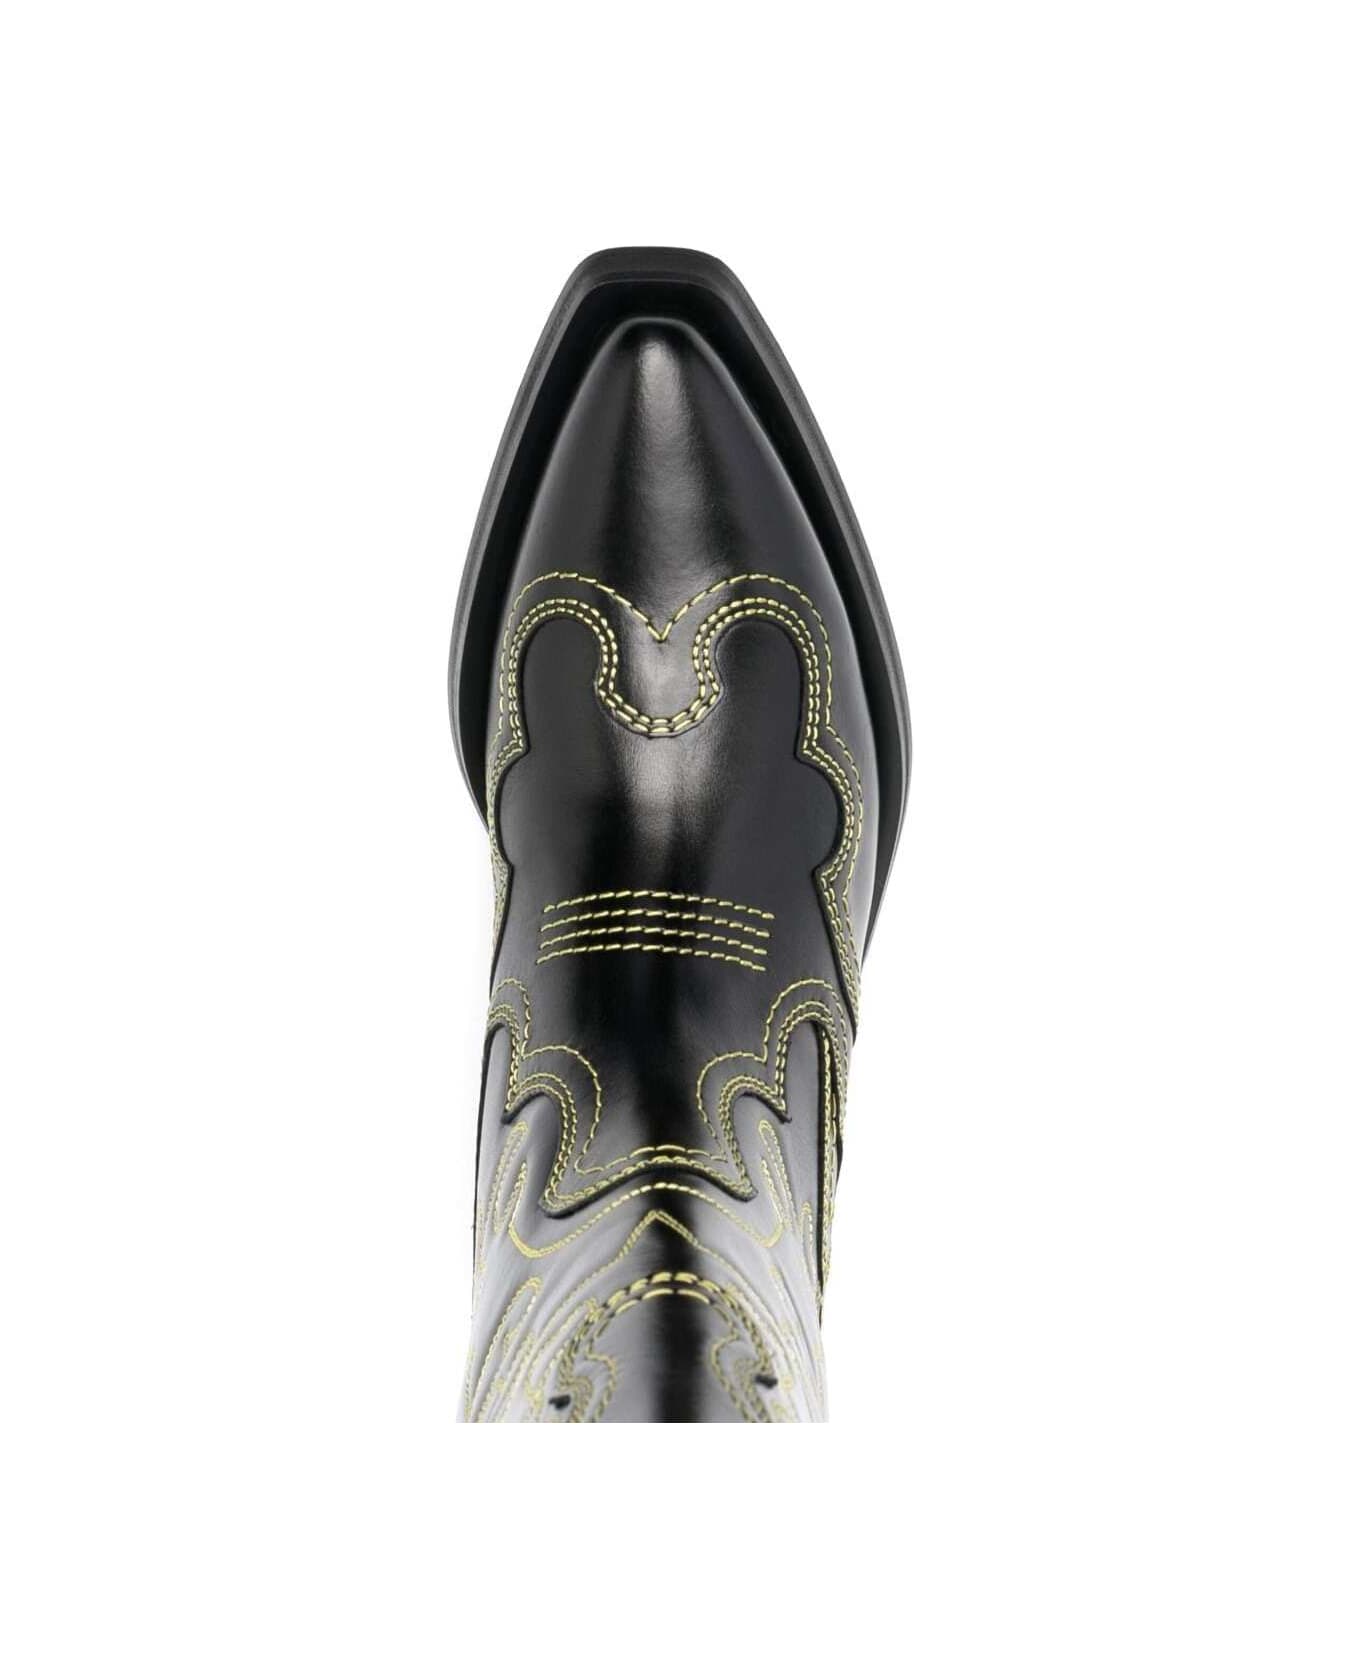 Ganni Black 'cowboy' Boots With Contrasting Embroidered Stitching In Leather Woman - Black